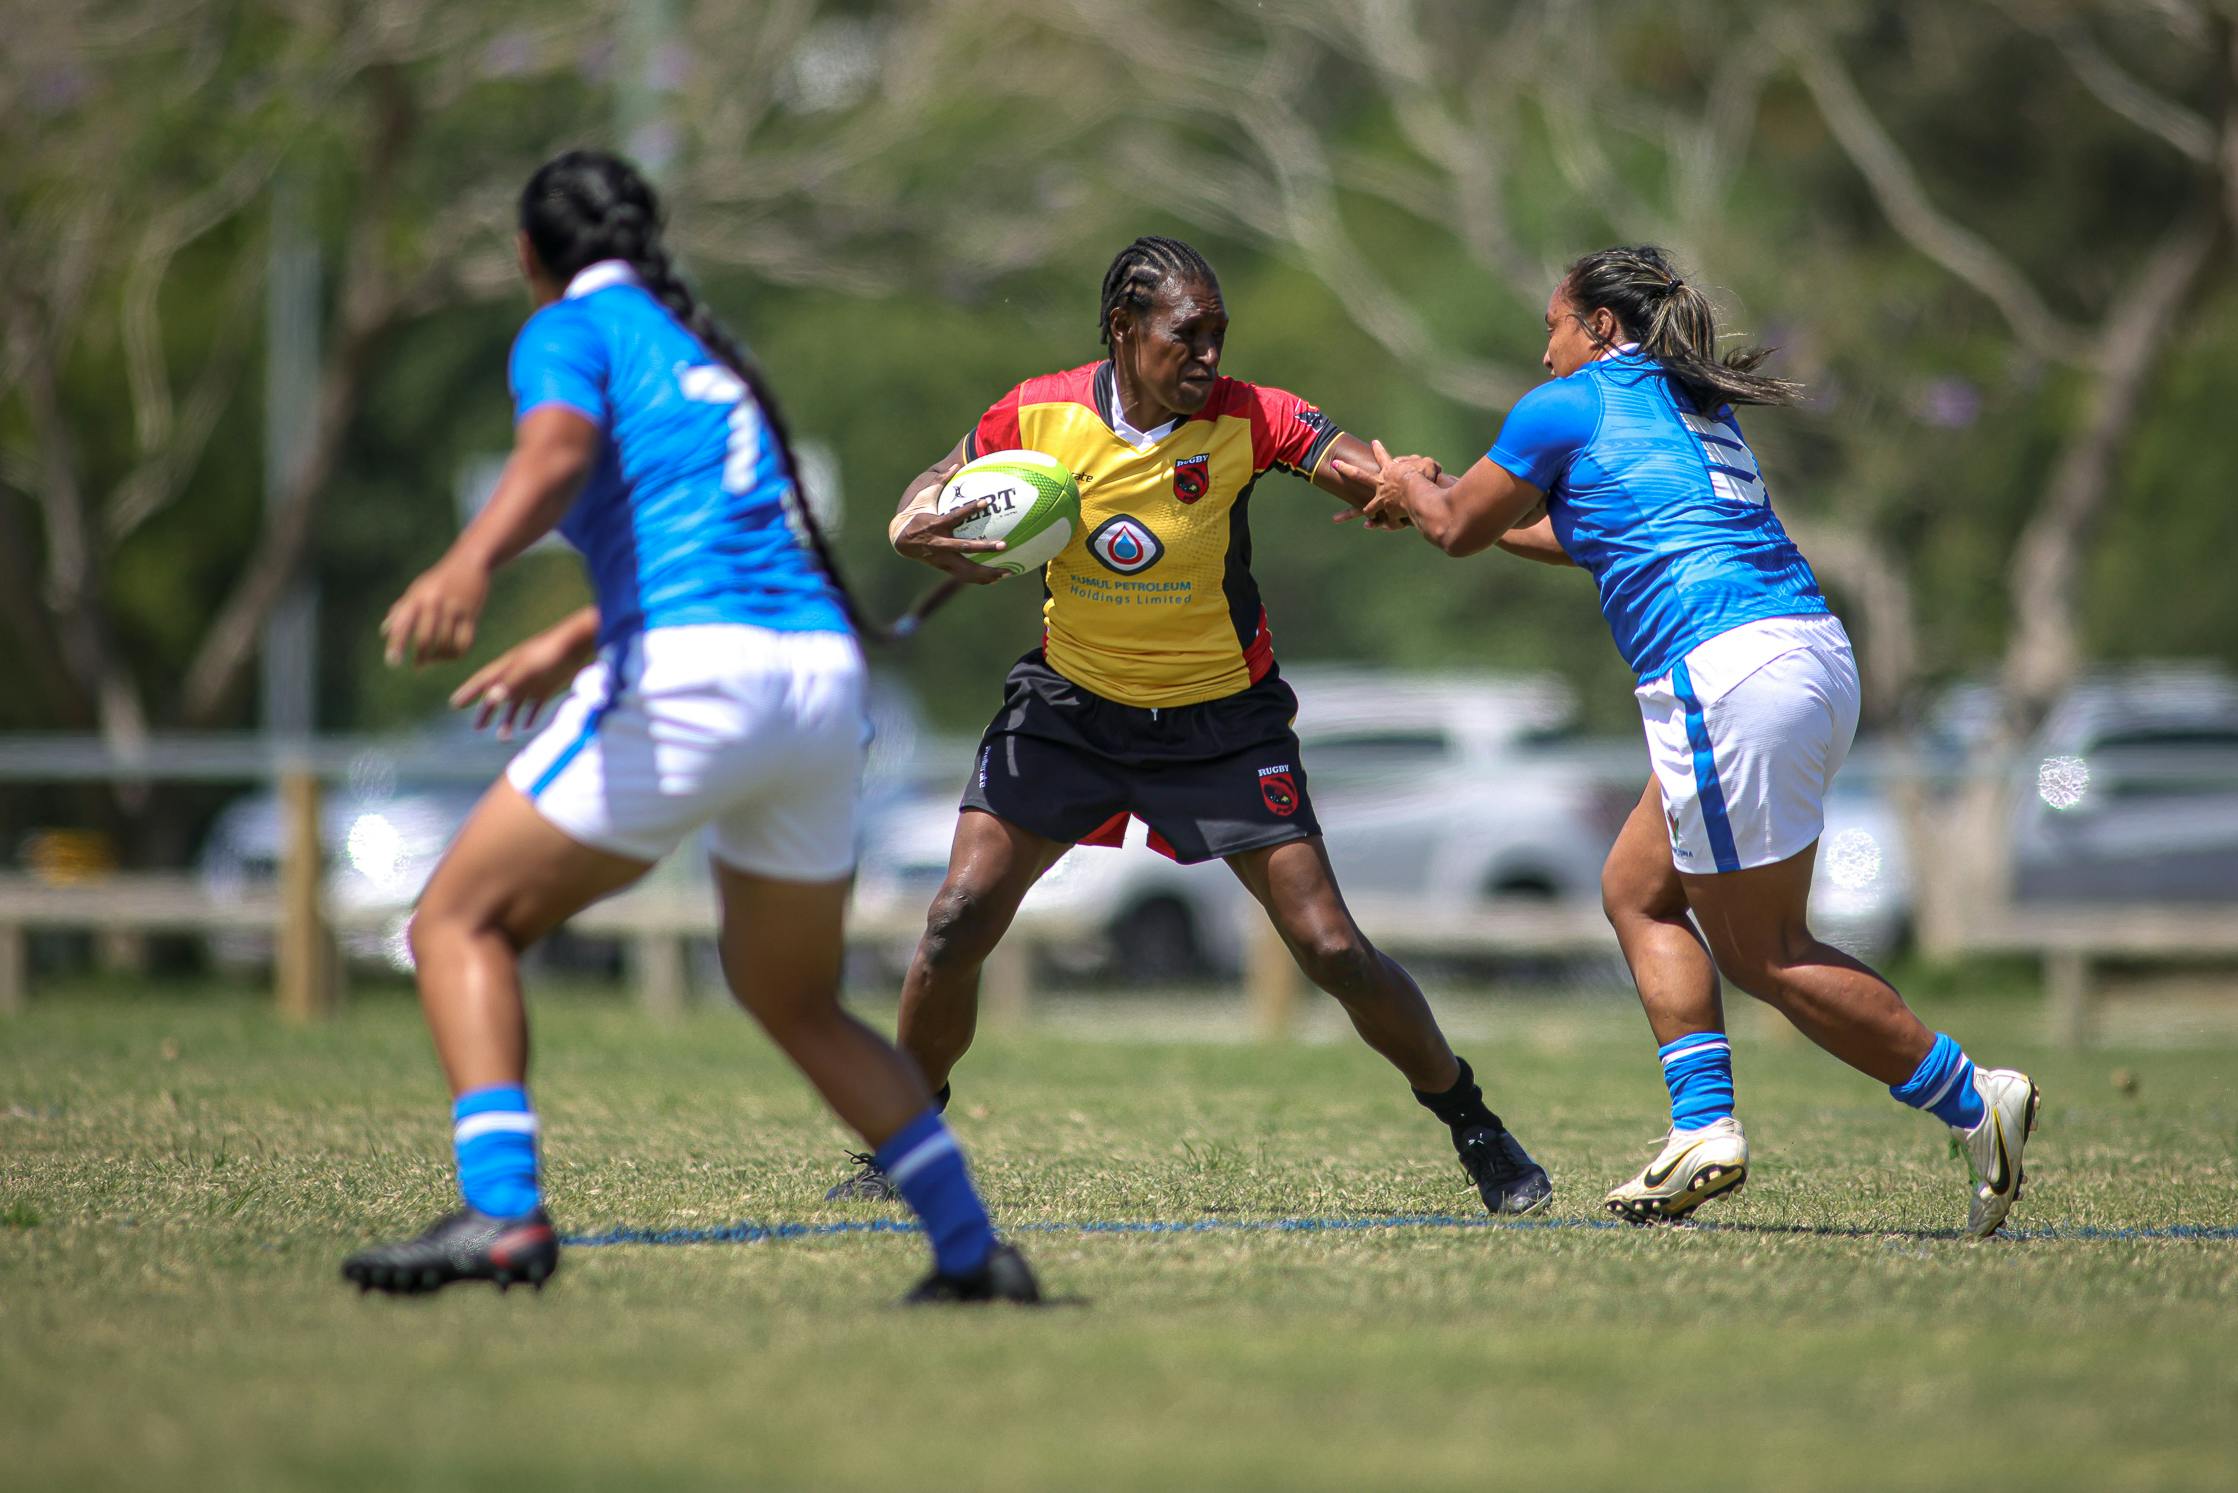 Papua New Guinea defeat Samoa on day one of 2022 Oceania Rugby Sevens Challenge